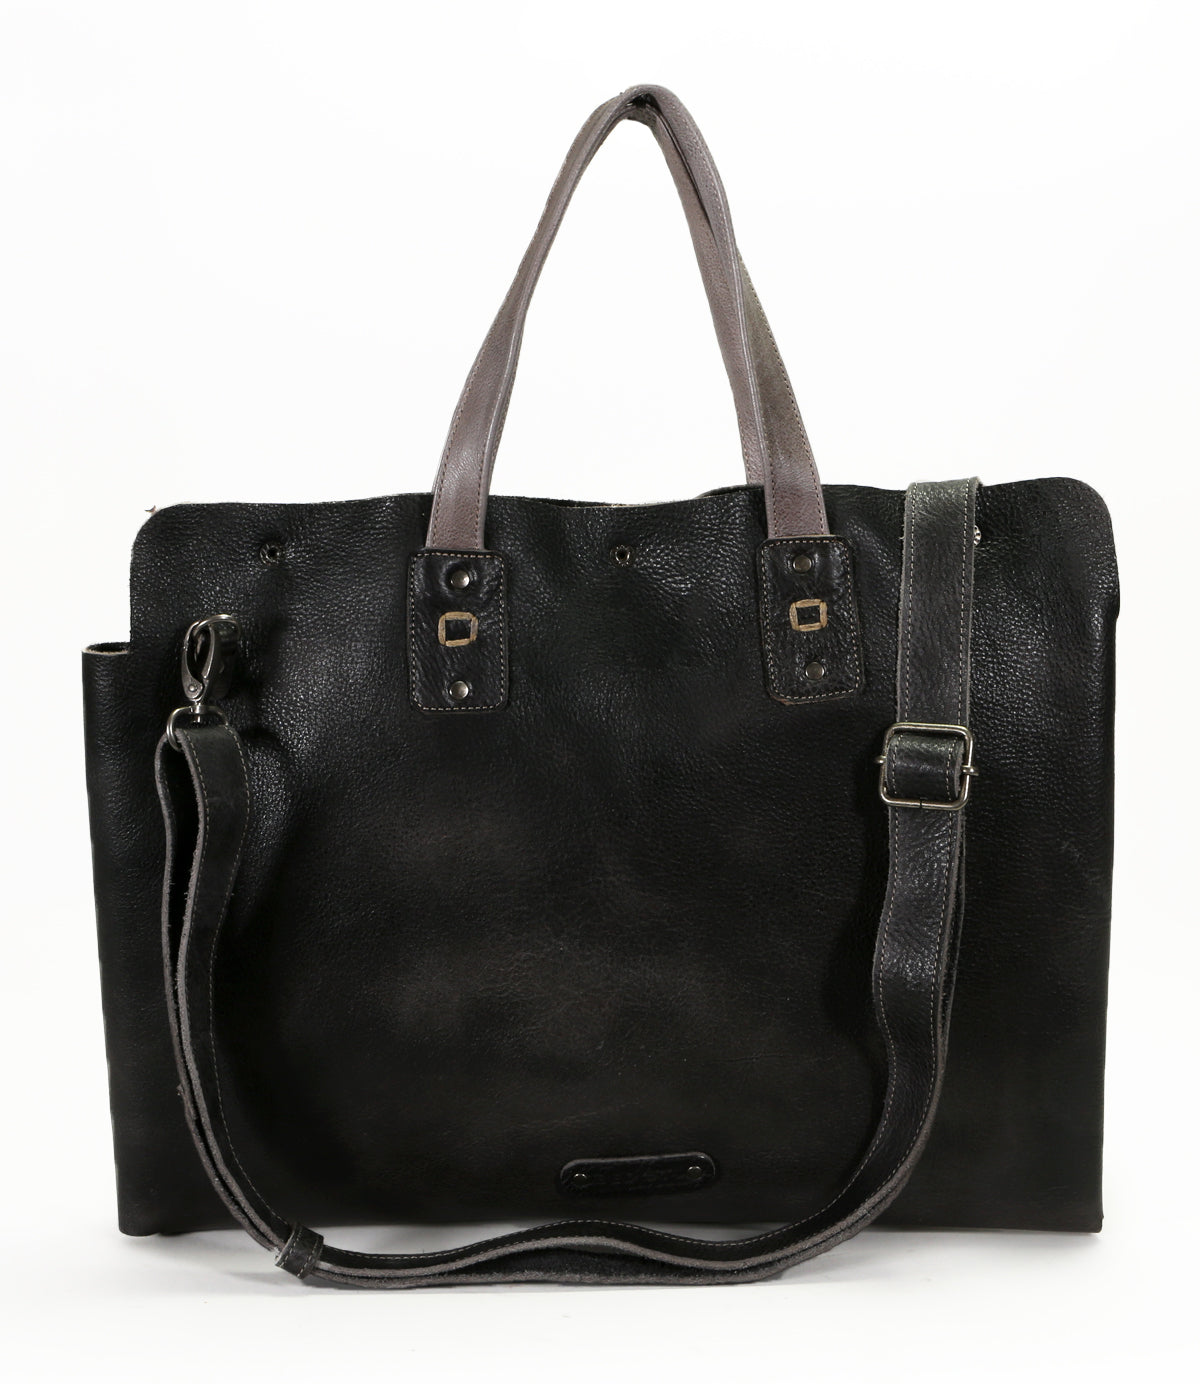 A multifunctional Bed Stu Commuter tote bag in black leather, with a shoulder strap for laptops up to 15 inches.